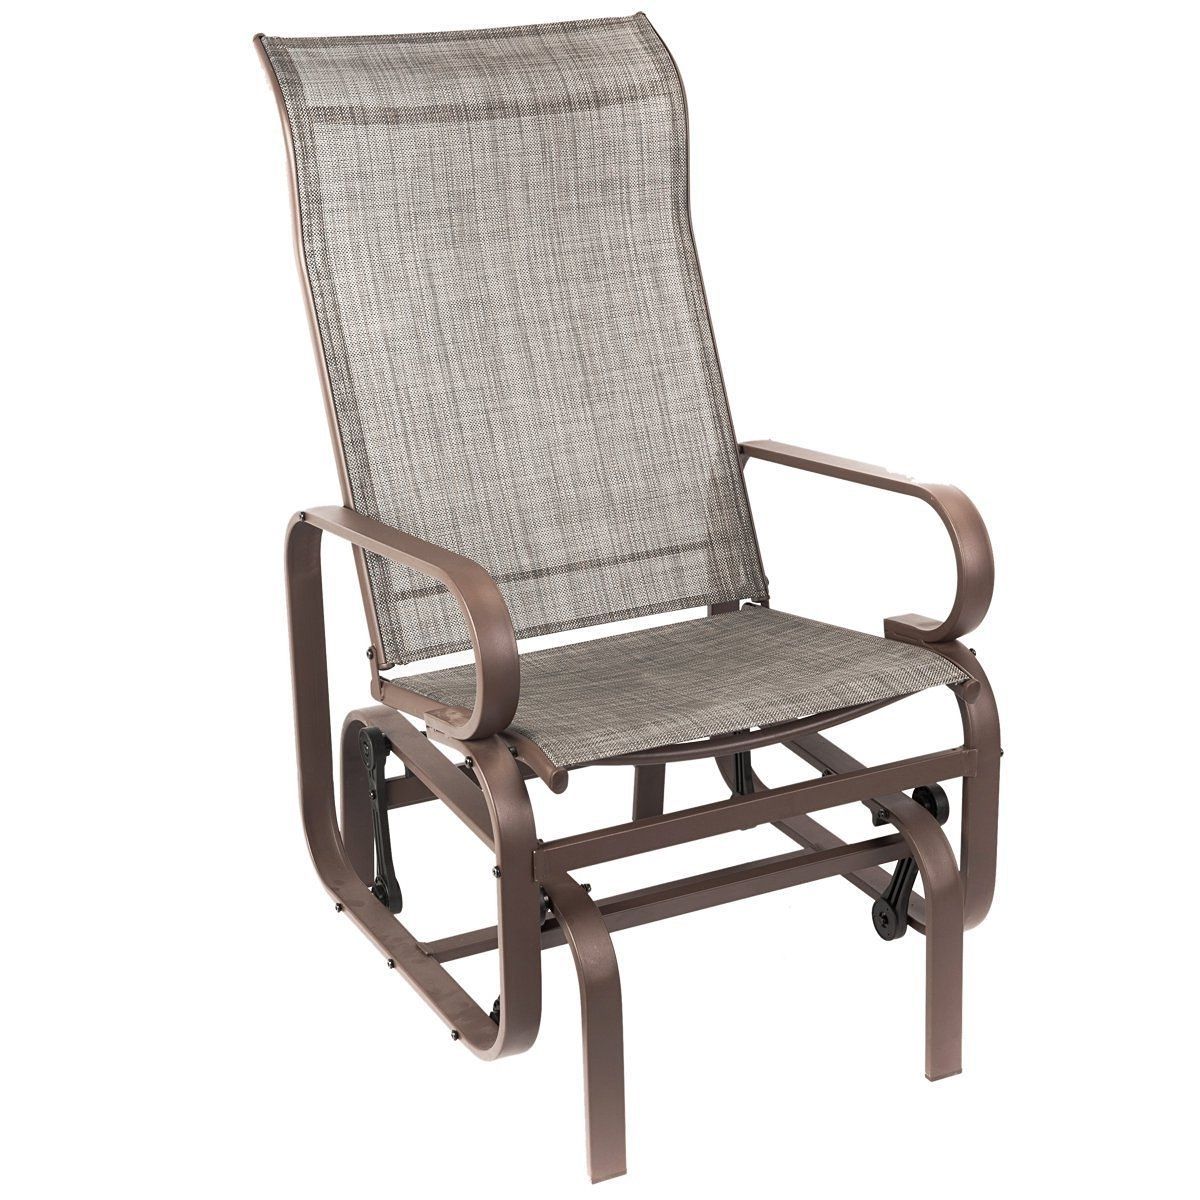 Preferred Naturefun Outdoor Patio Rocker Chair, Balcony Glider Rocking Lounge Inside Patio Rocking Chairs And Gliders (View 1 of 15)